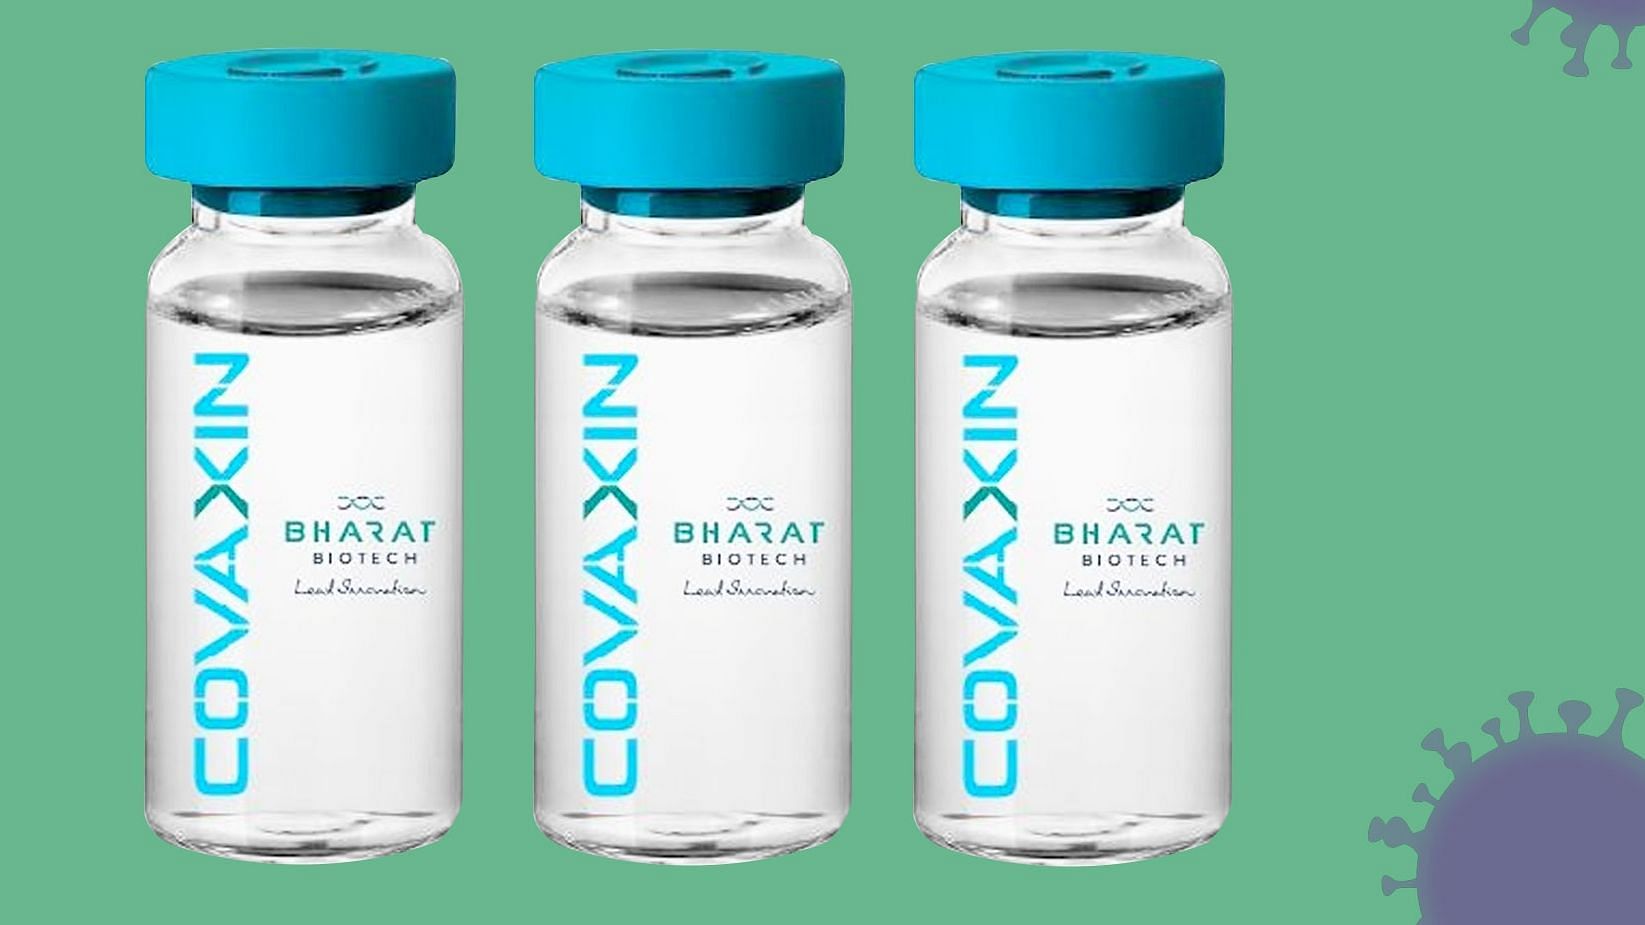 Bharat Biotech, the company which is developing one of India’s indigenous vaccine candidates called Covaxin, said the vaccine will be at least 60 percent effective.&nbsp;